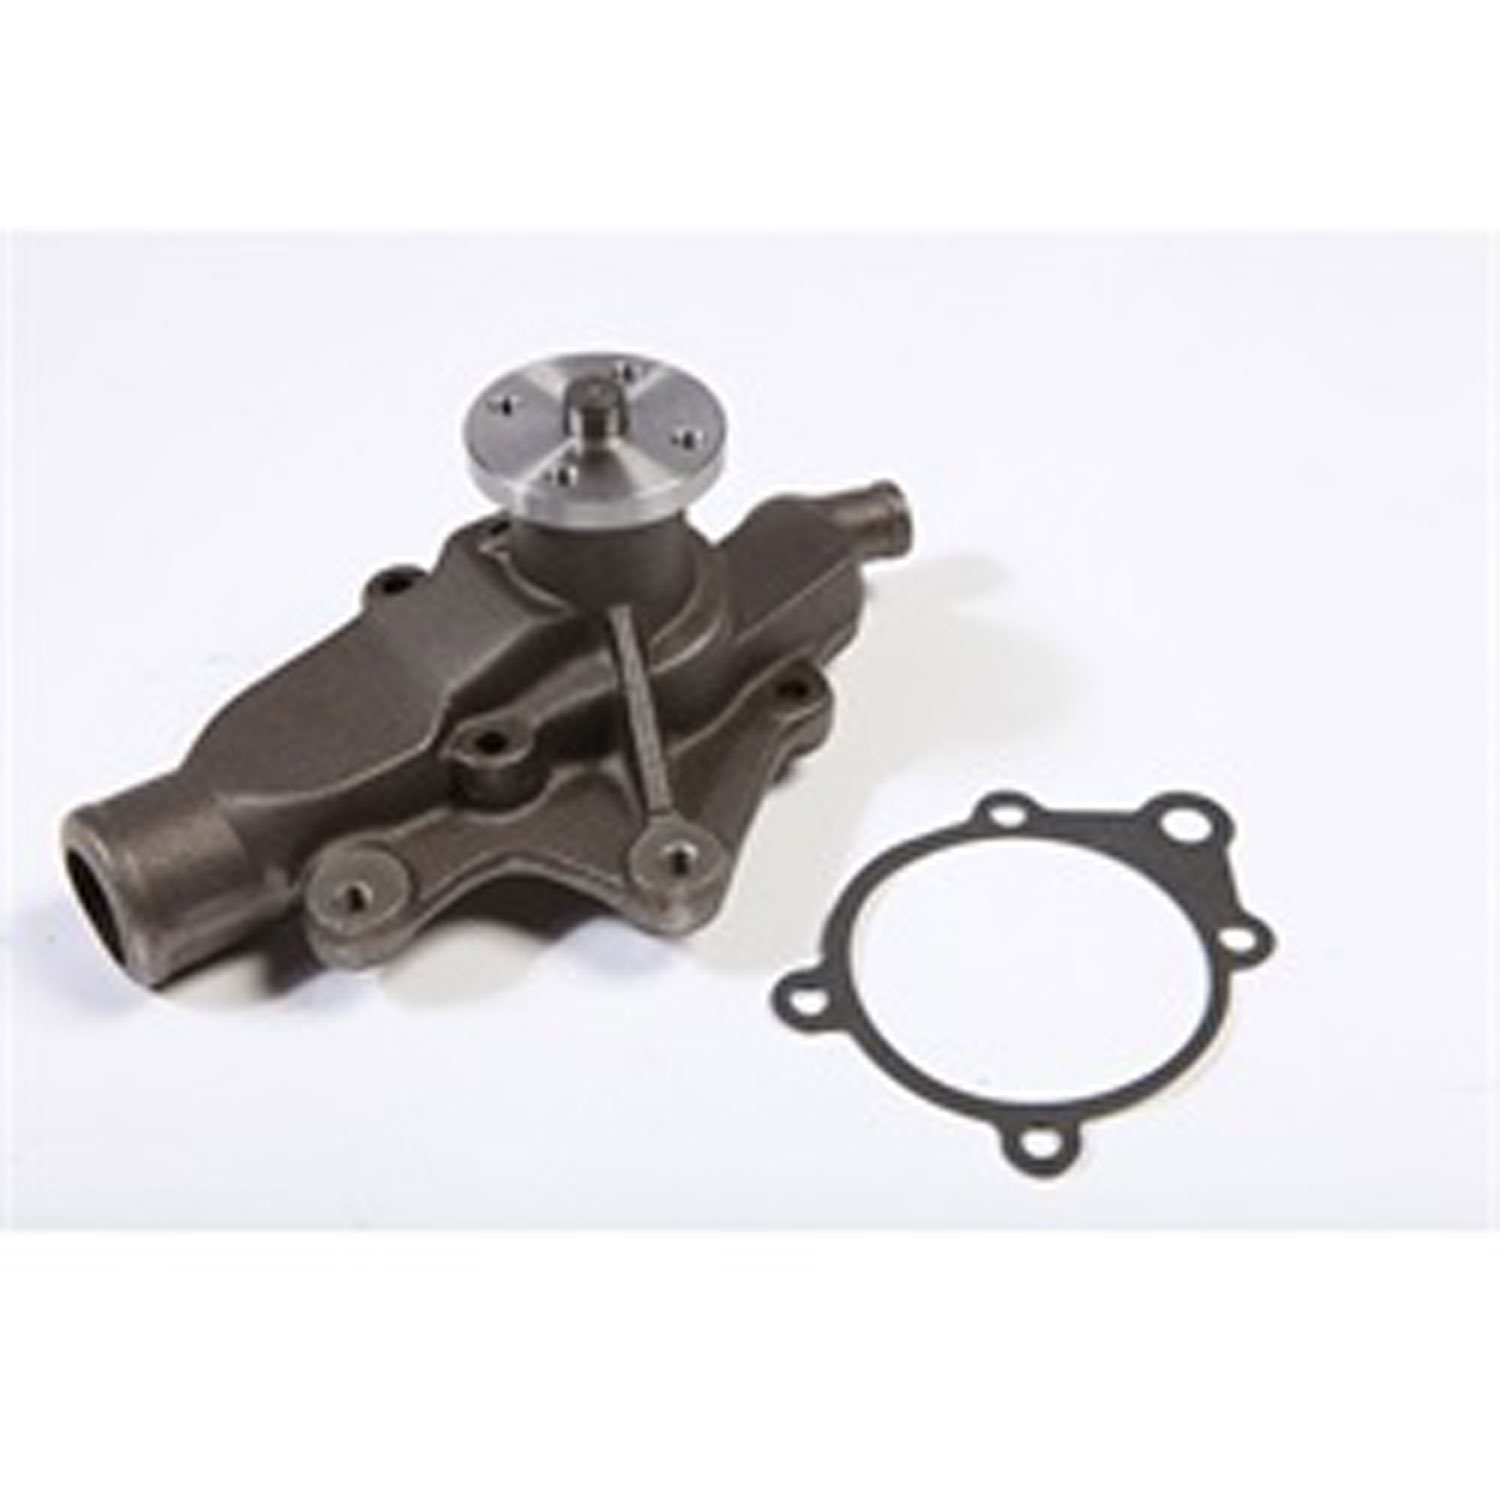 Replacement water pump from Omix-ADA, Fits 80-83 Jeep CJ5 80-86 CJ7 81-86 CJ8 and 87-90 Wrangler